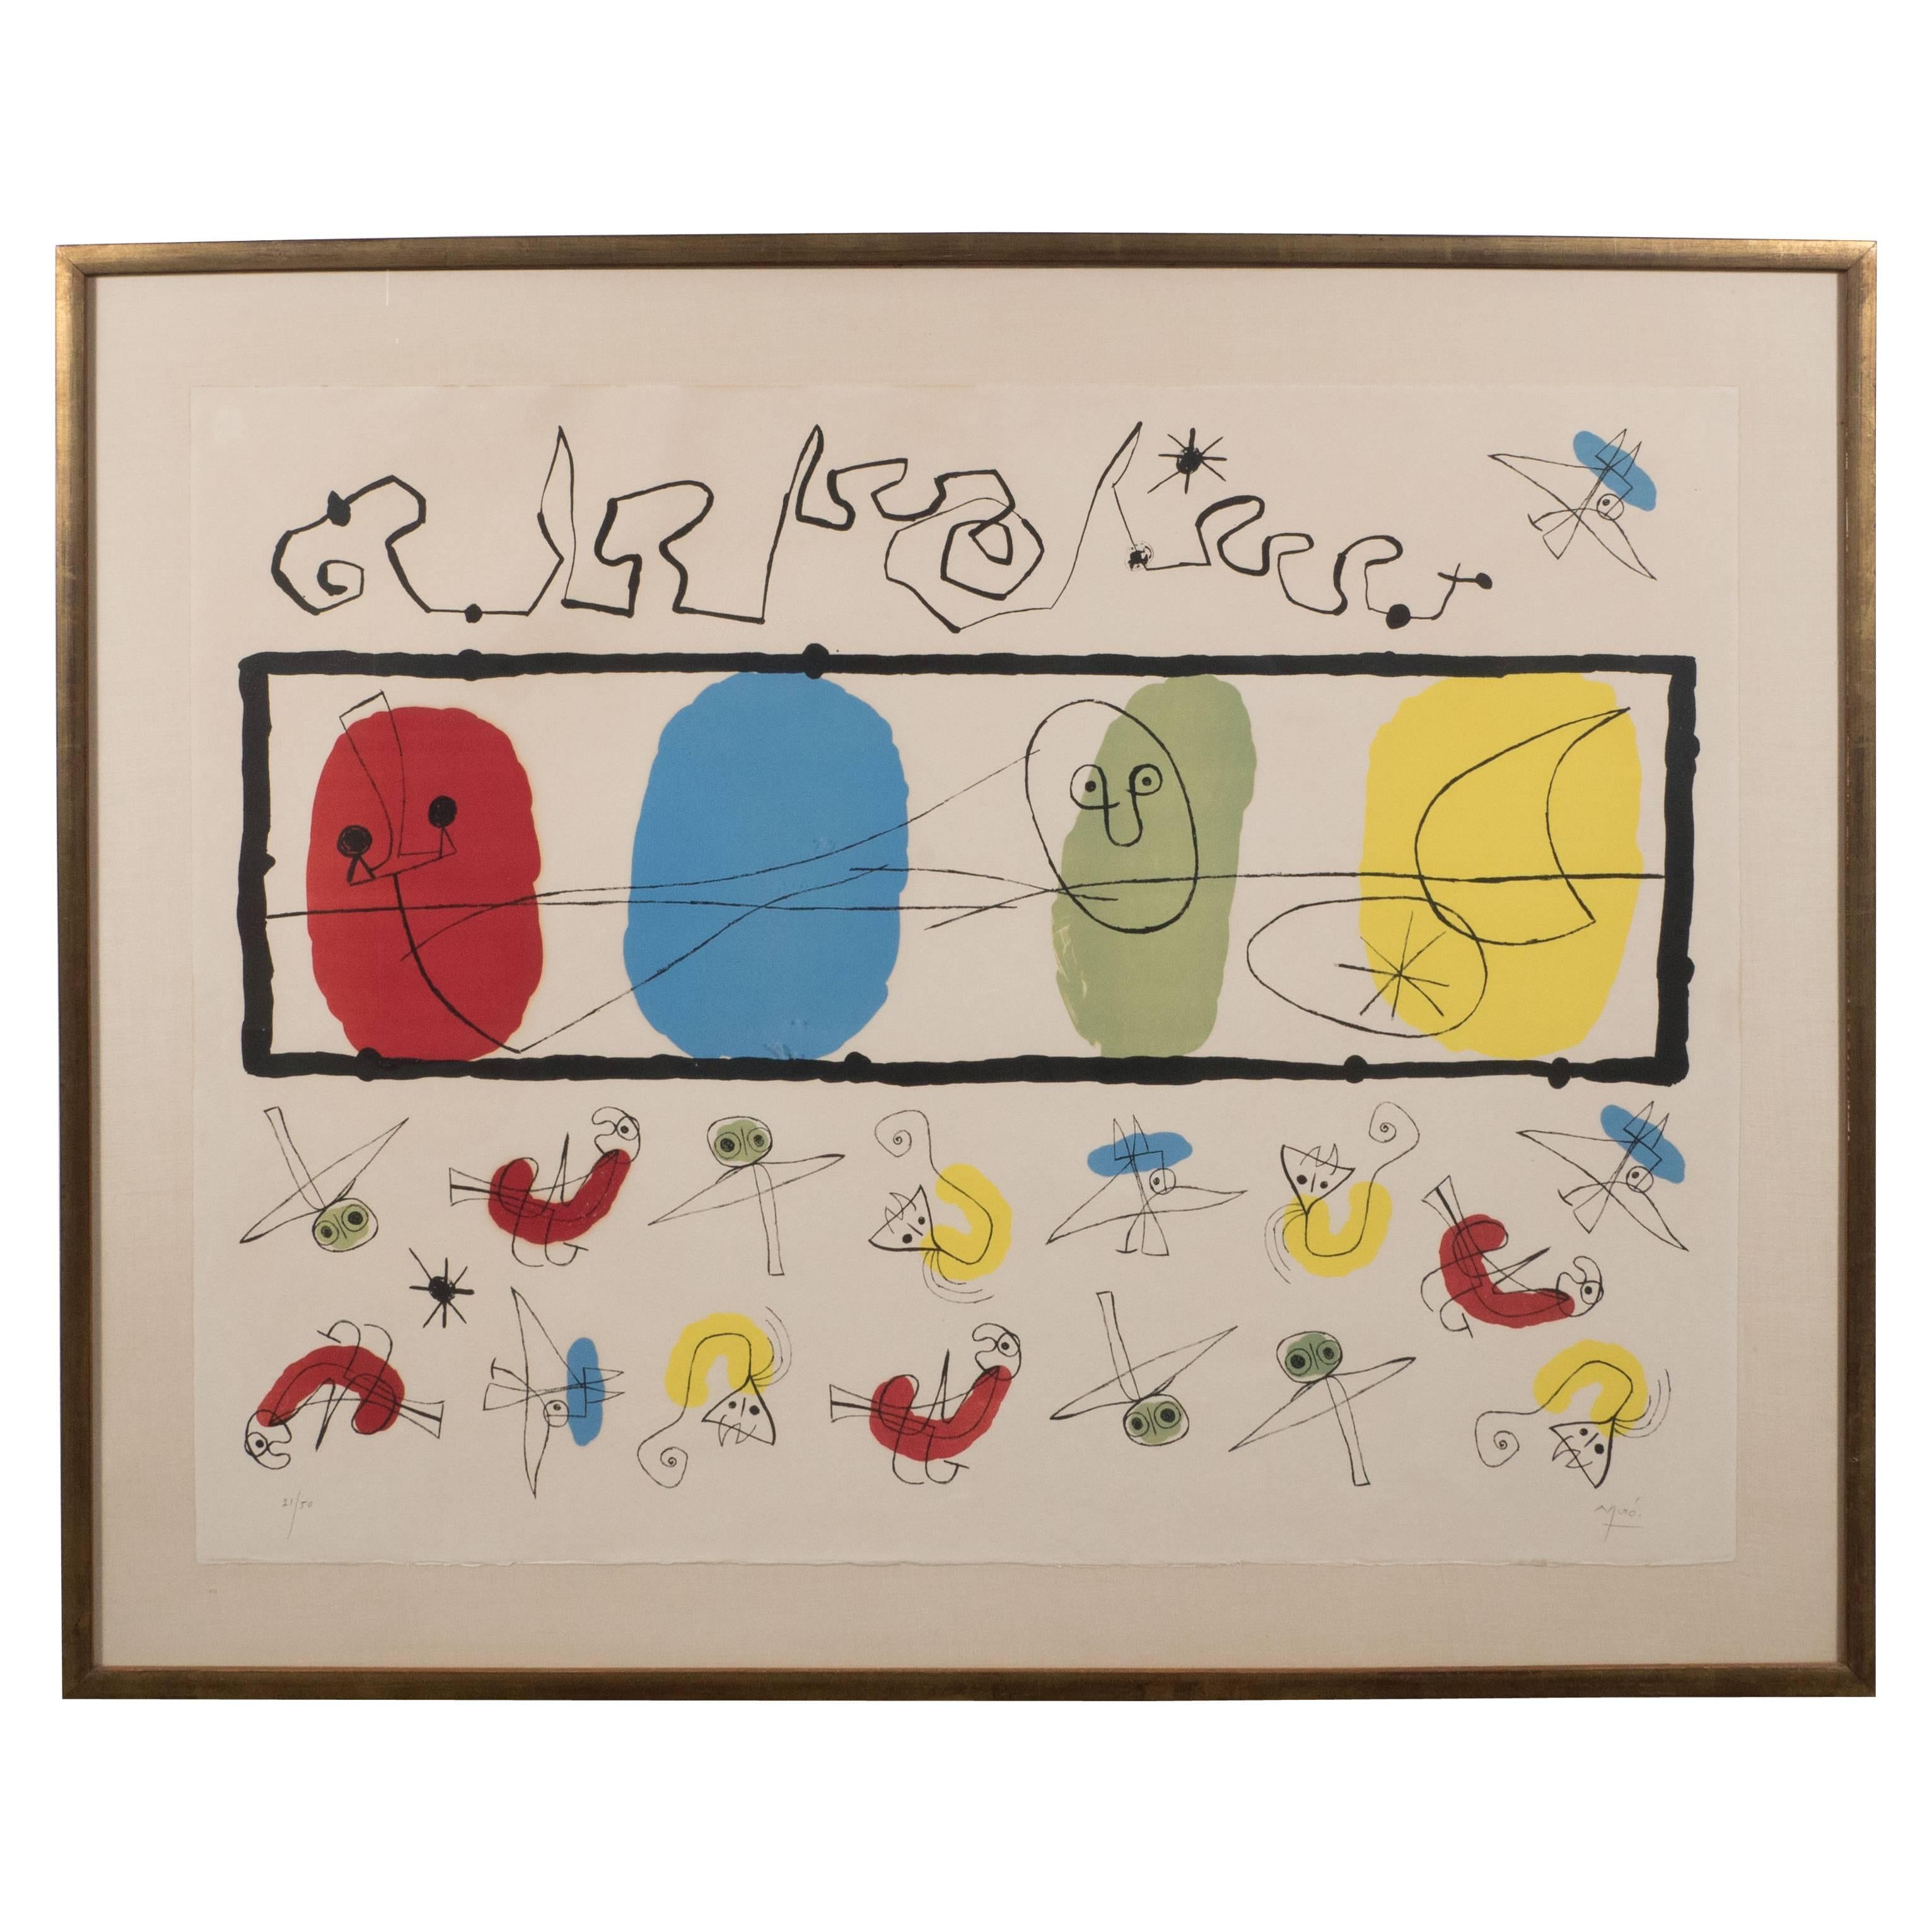 Joan Miro "the Birds" 'M. 241' Lithograph Printed in Colors, 1956